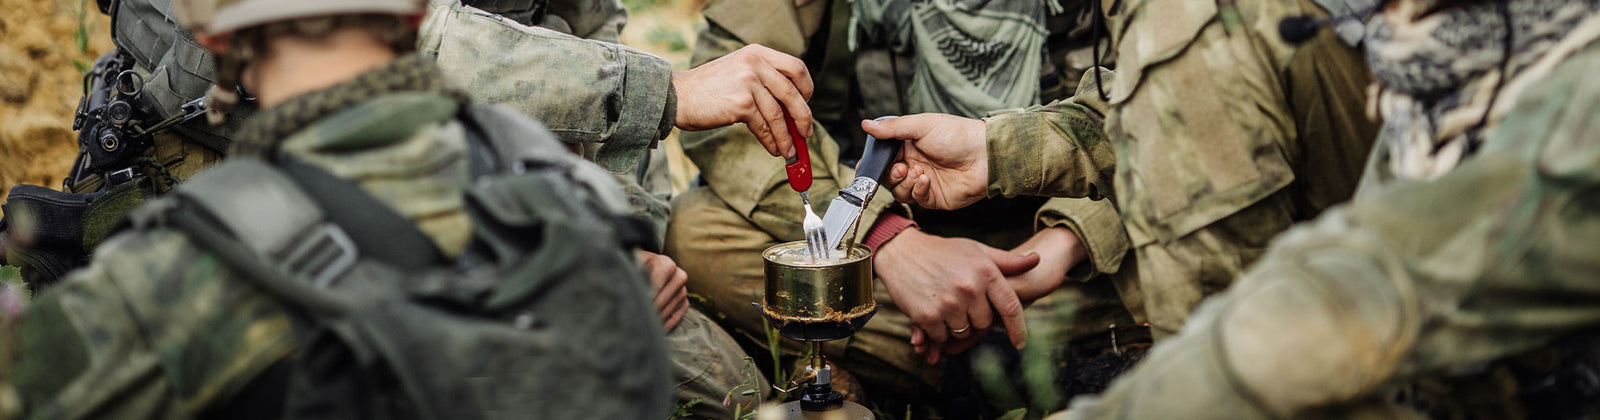 military warfighters eating from campstove